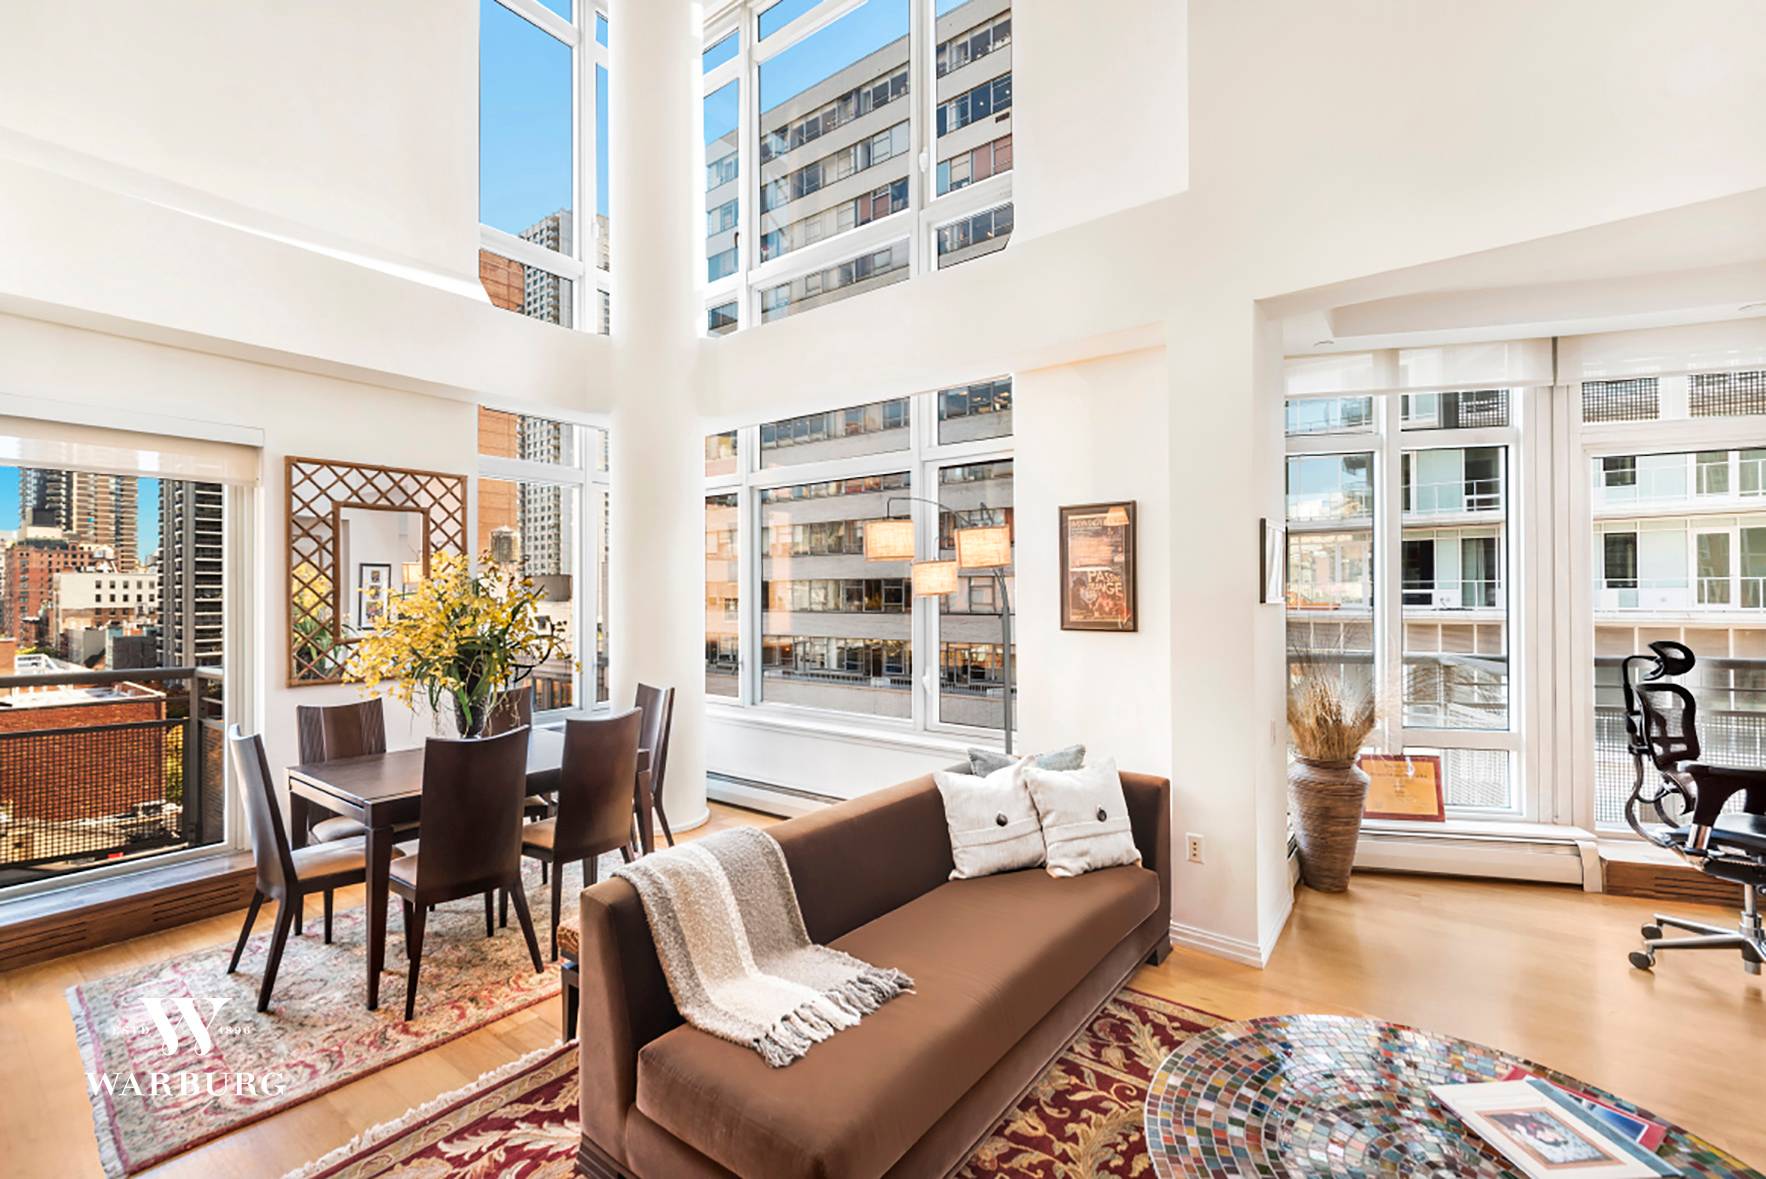 Gorgeous loft in the heart of the City Sun drenched light lovers paradise with spectacular views east to the Queensboro Bridge from two balconies.